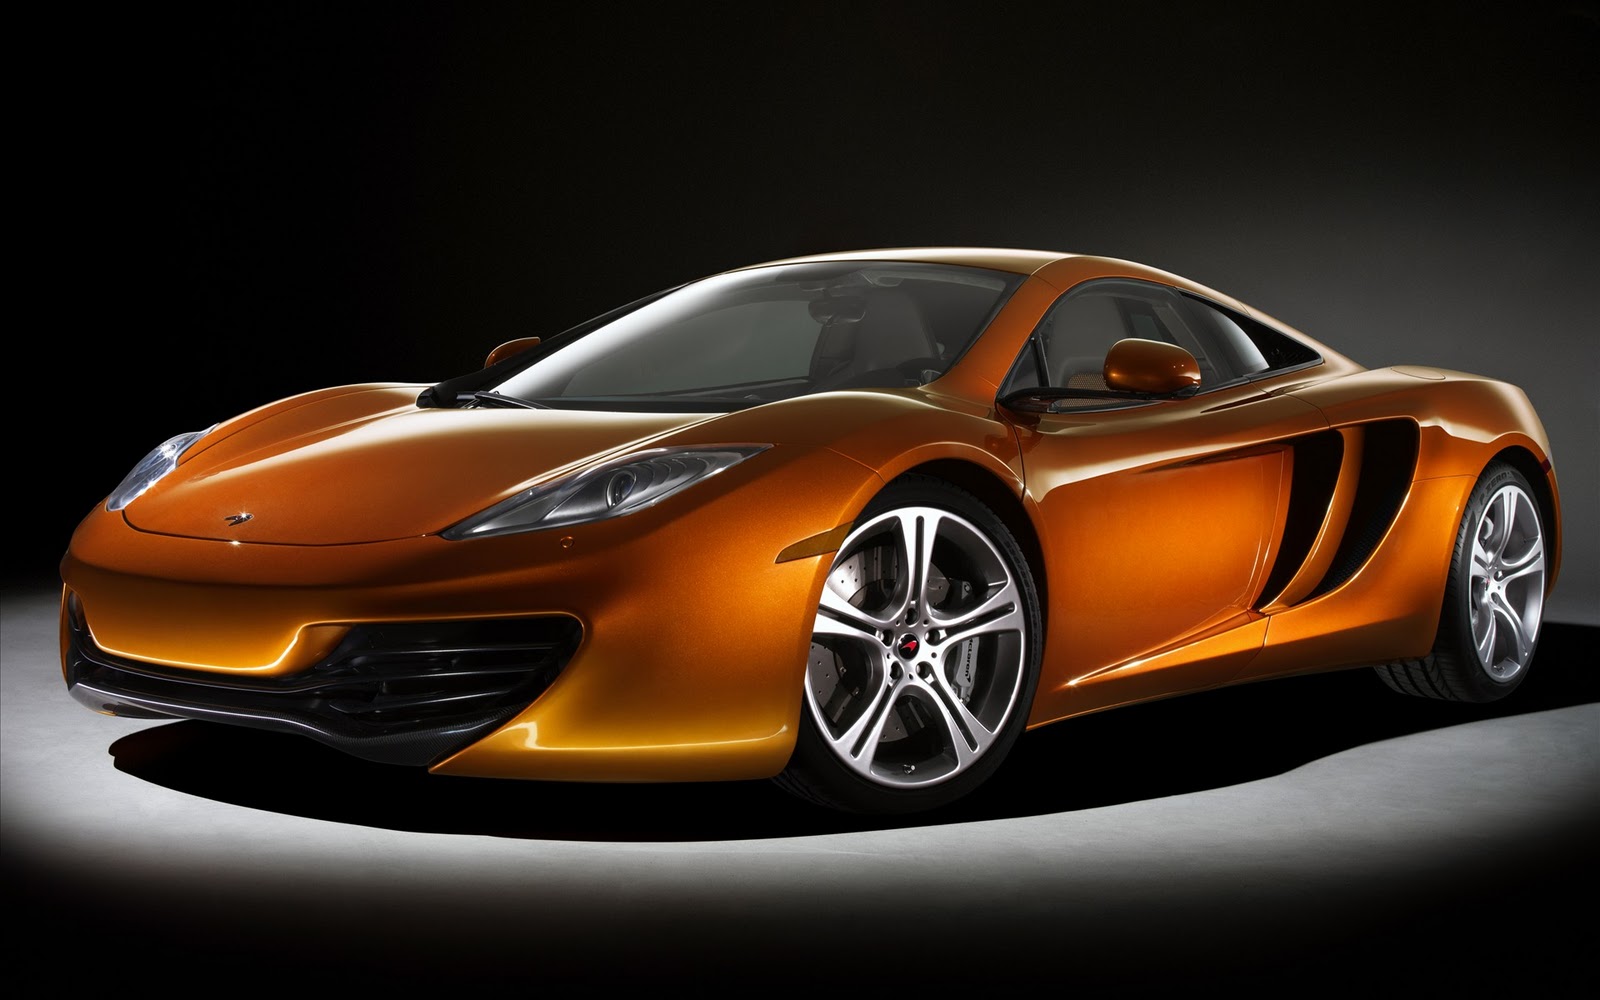 Cool cars wallpapers 2011 Cool Car Wallpapers